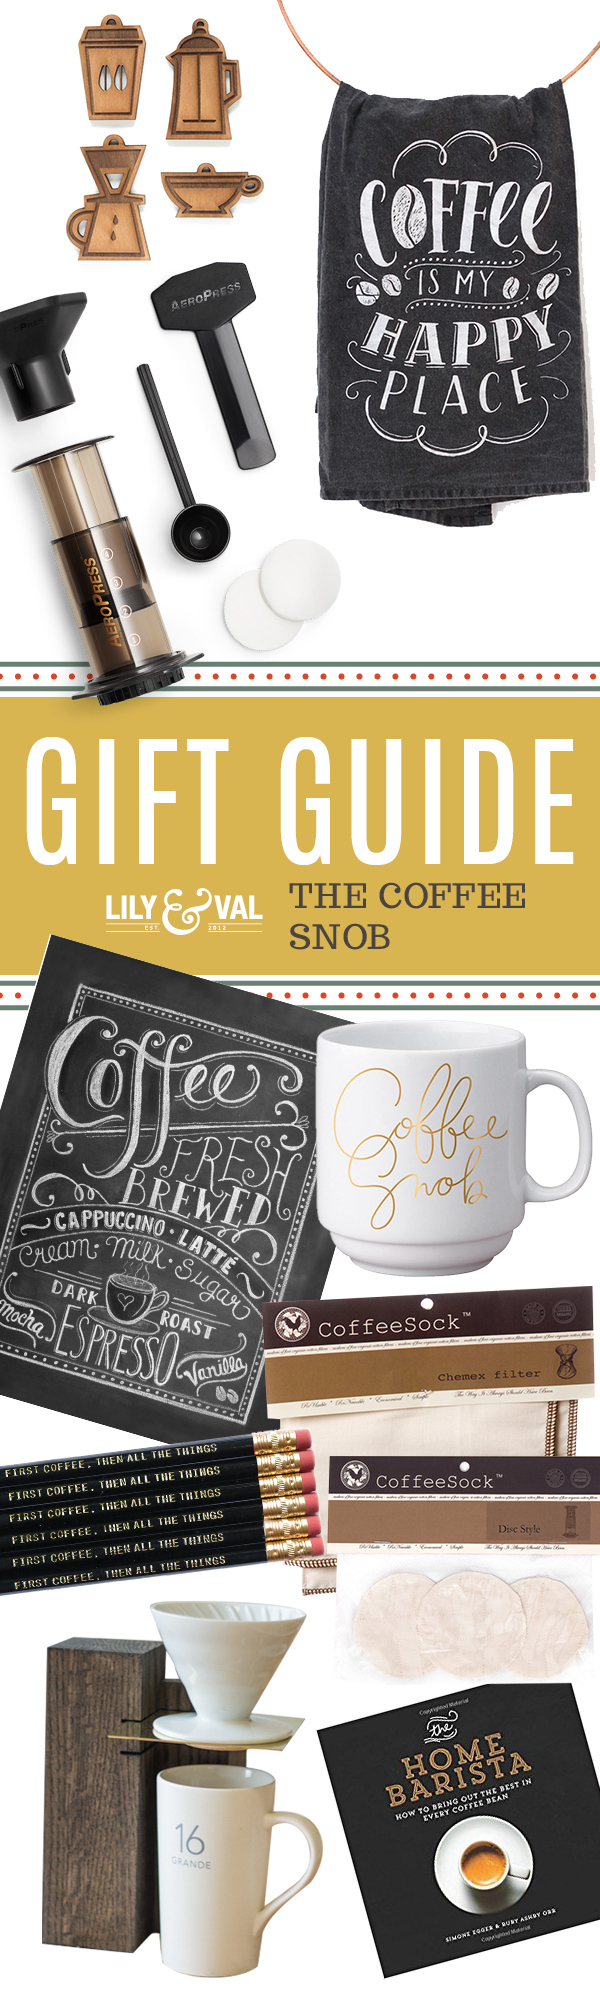 Lily & Val Gift Guide: The Coffee Snob